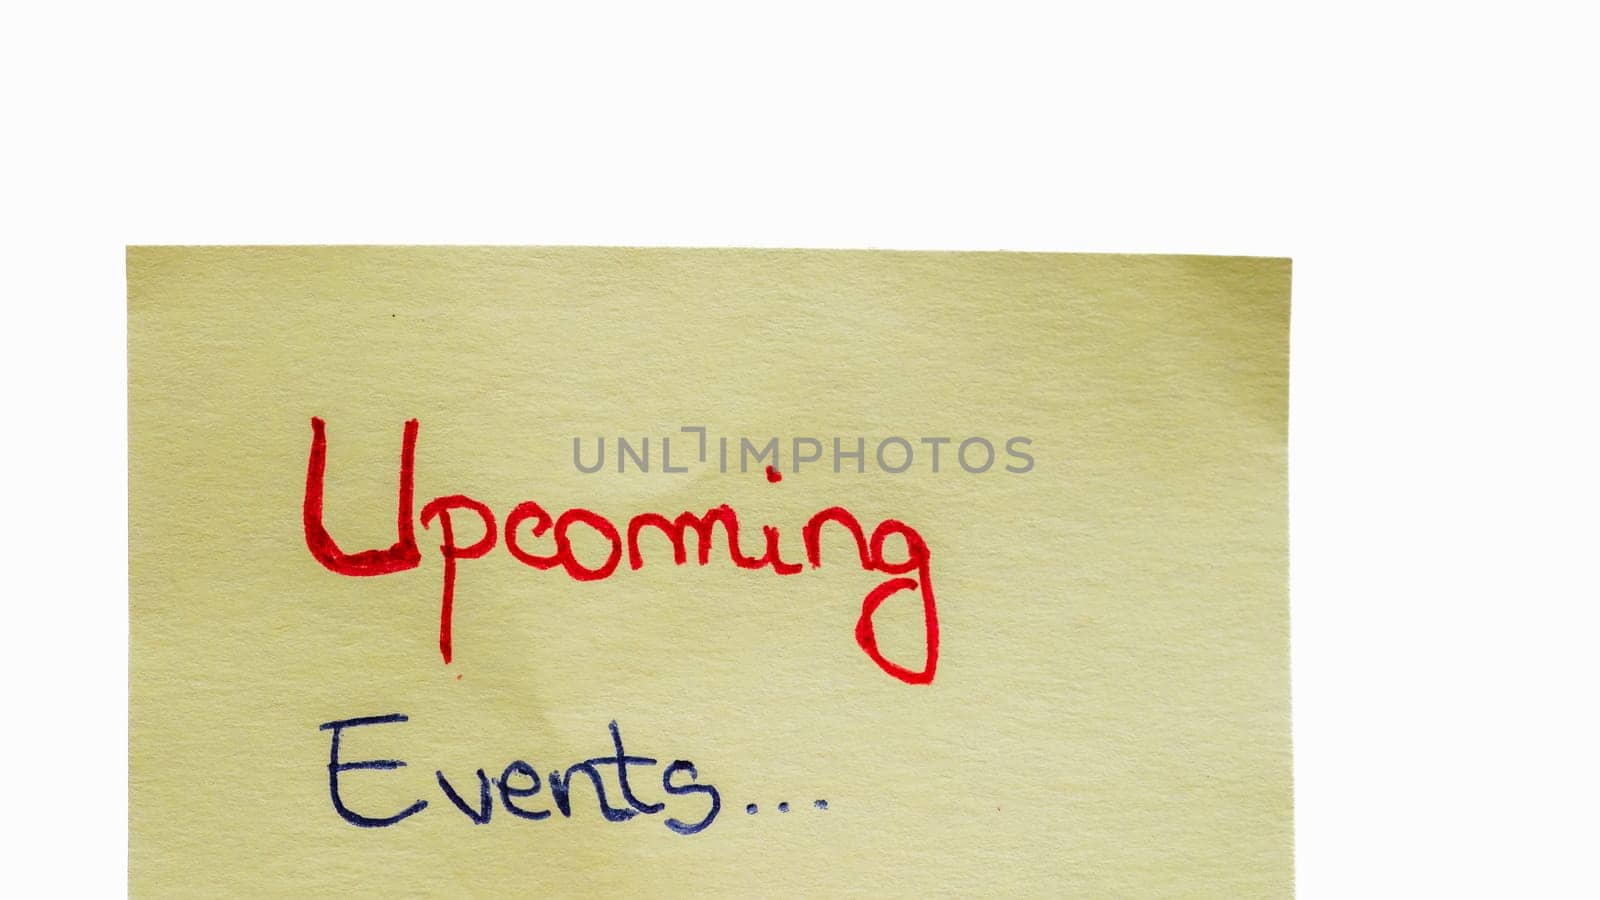 Upcoming events handwriting text close up isolated on yellow paper with copy space. by vladispas